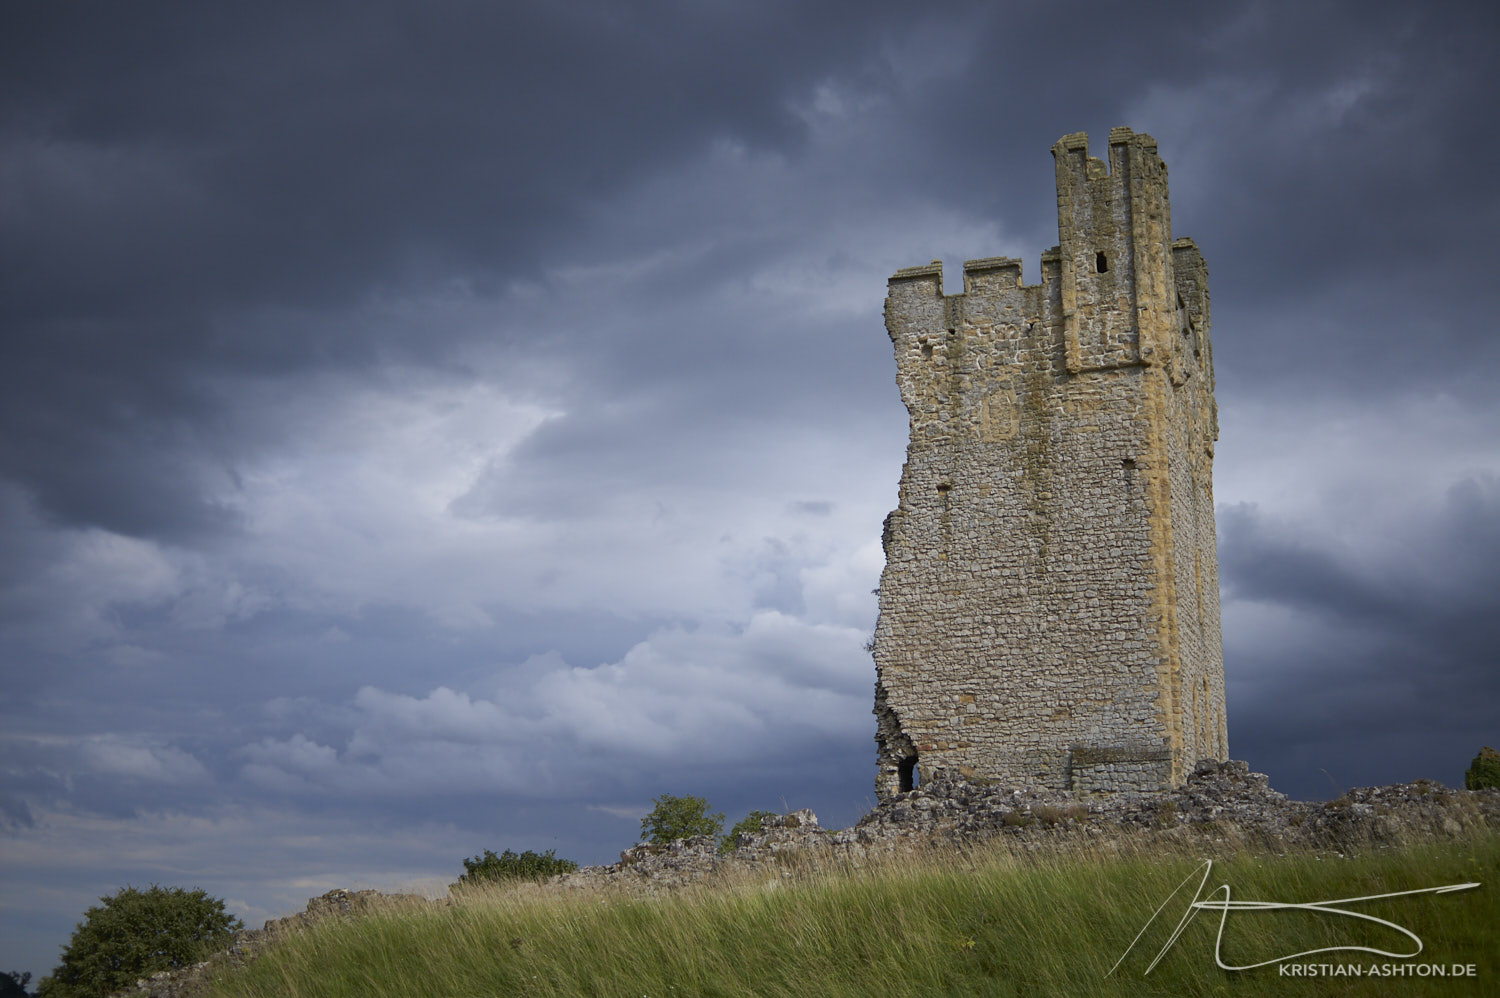 The medieval Helmsley Castle